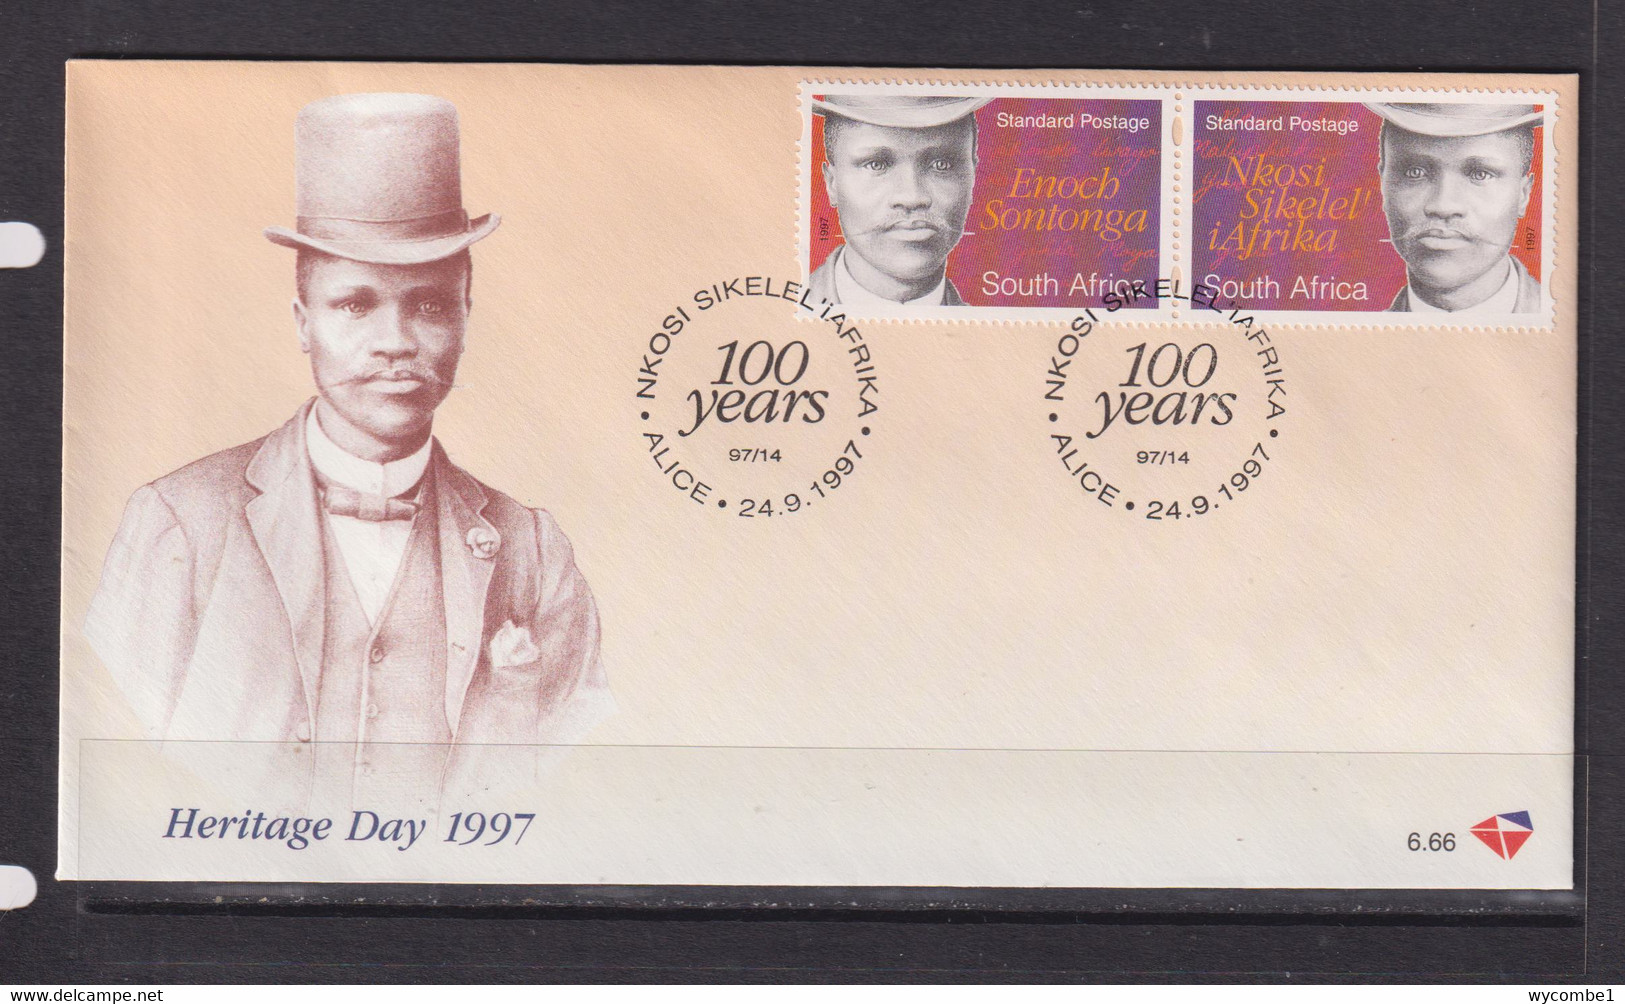 SOUTH AFRICA - 1997 Heritage Day FDC - Covers & Documents